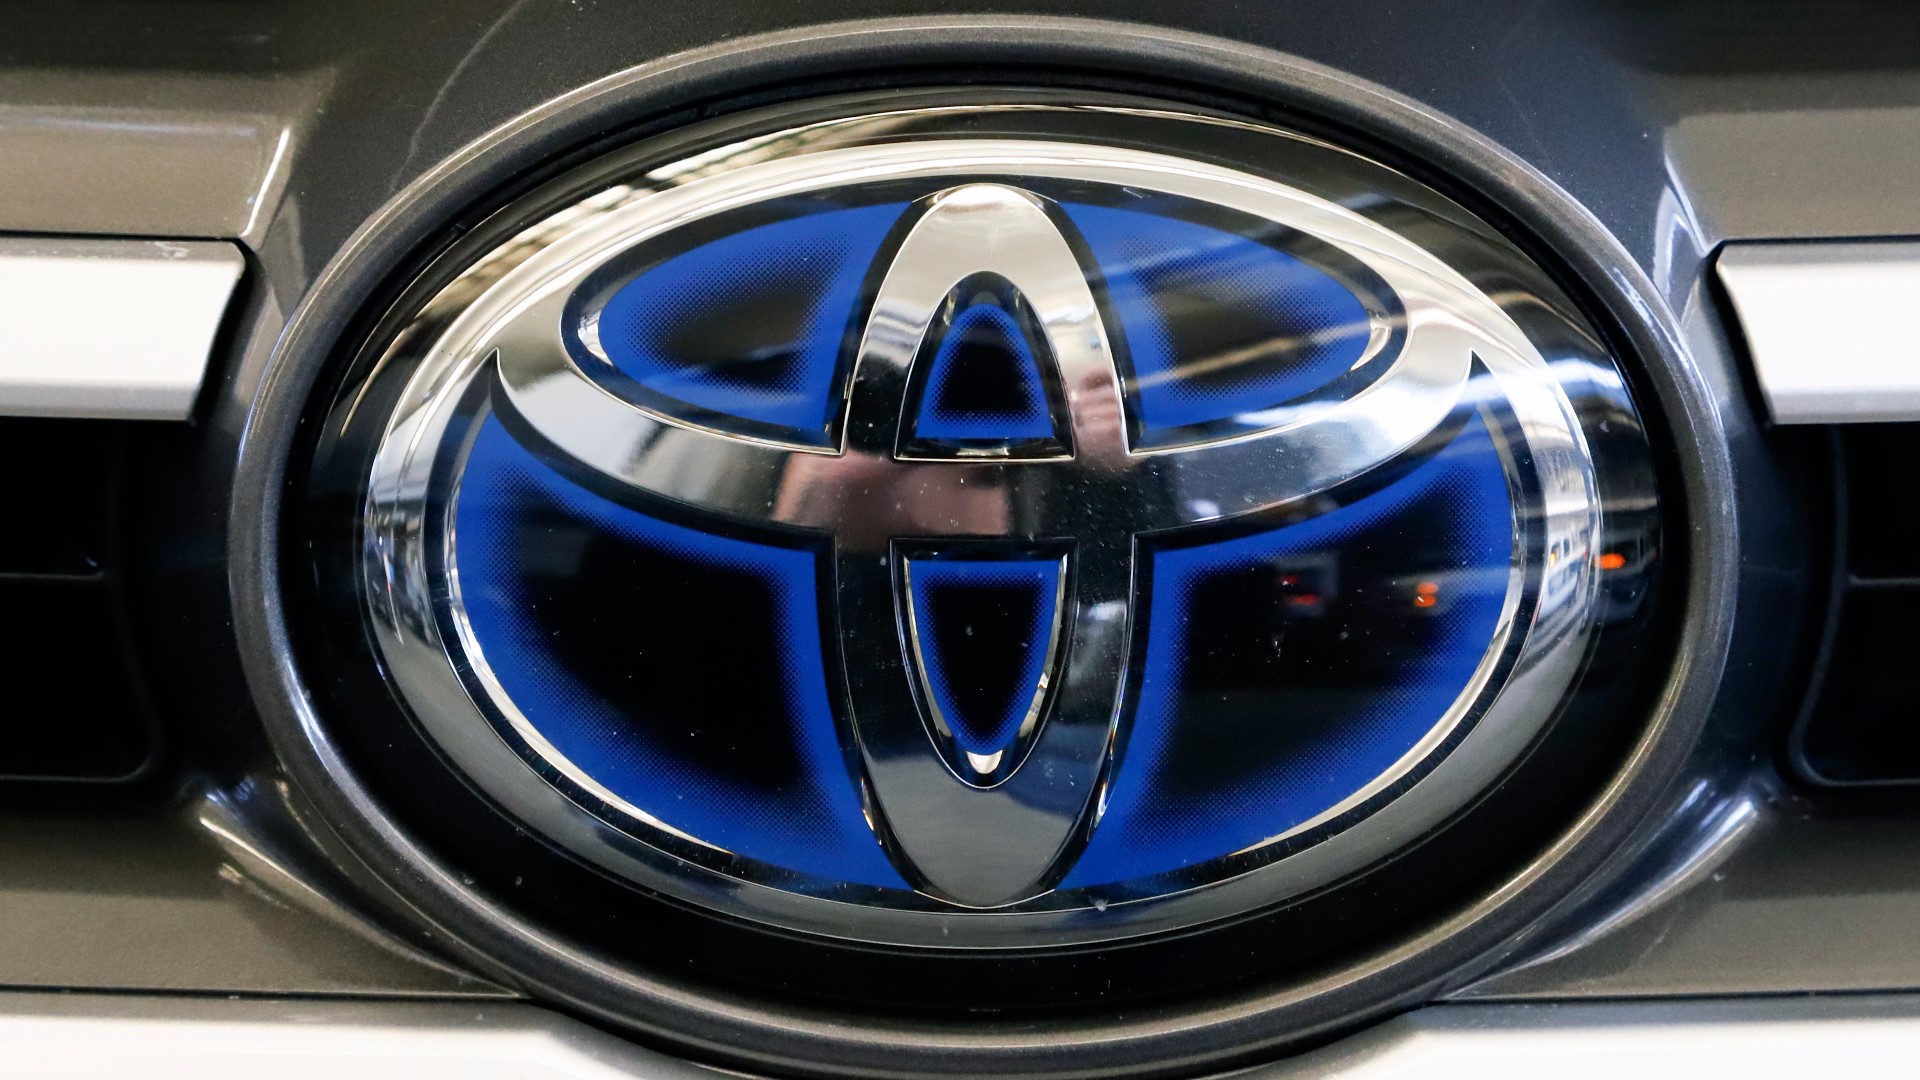 Toyota airbag recall 373,000 Venza SUVs may have wiring problem